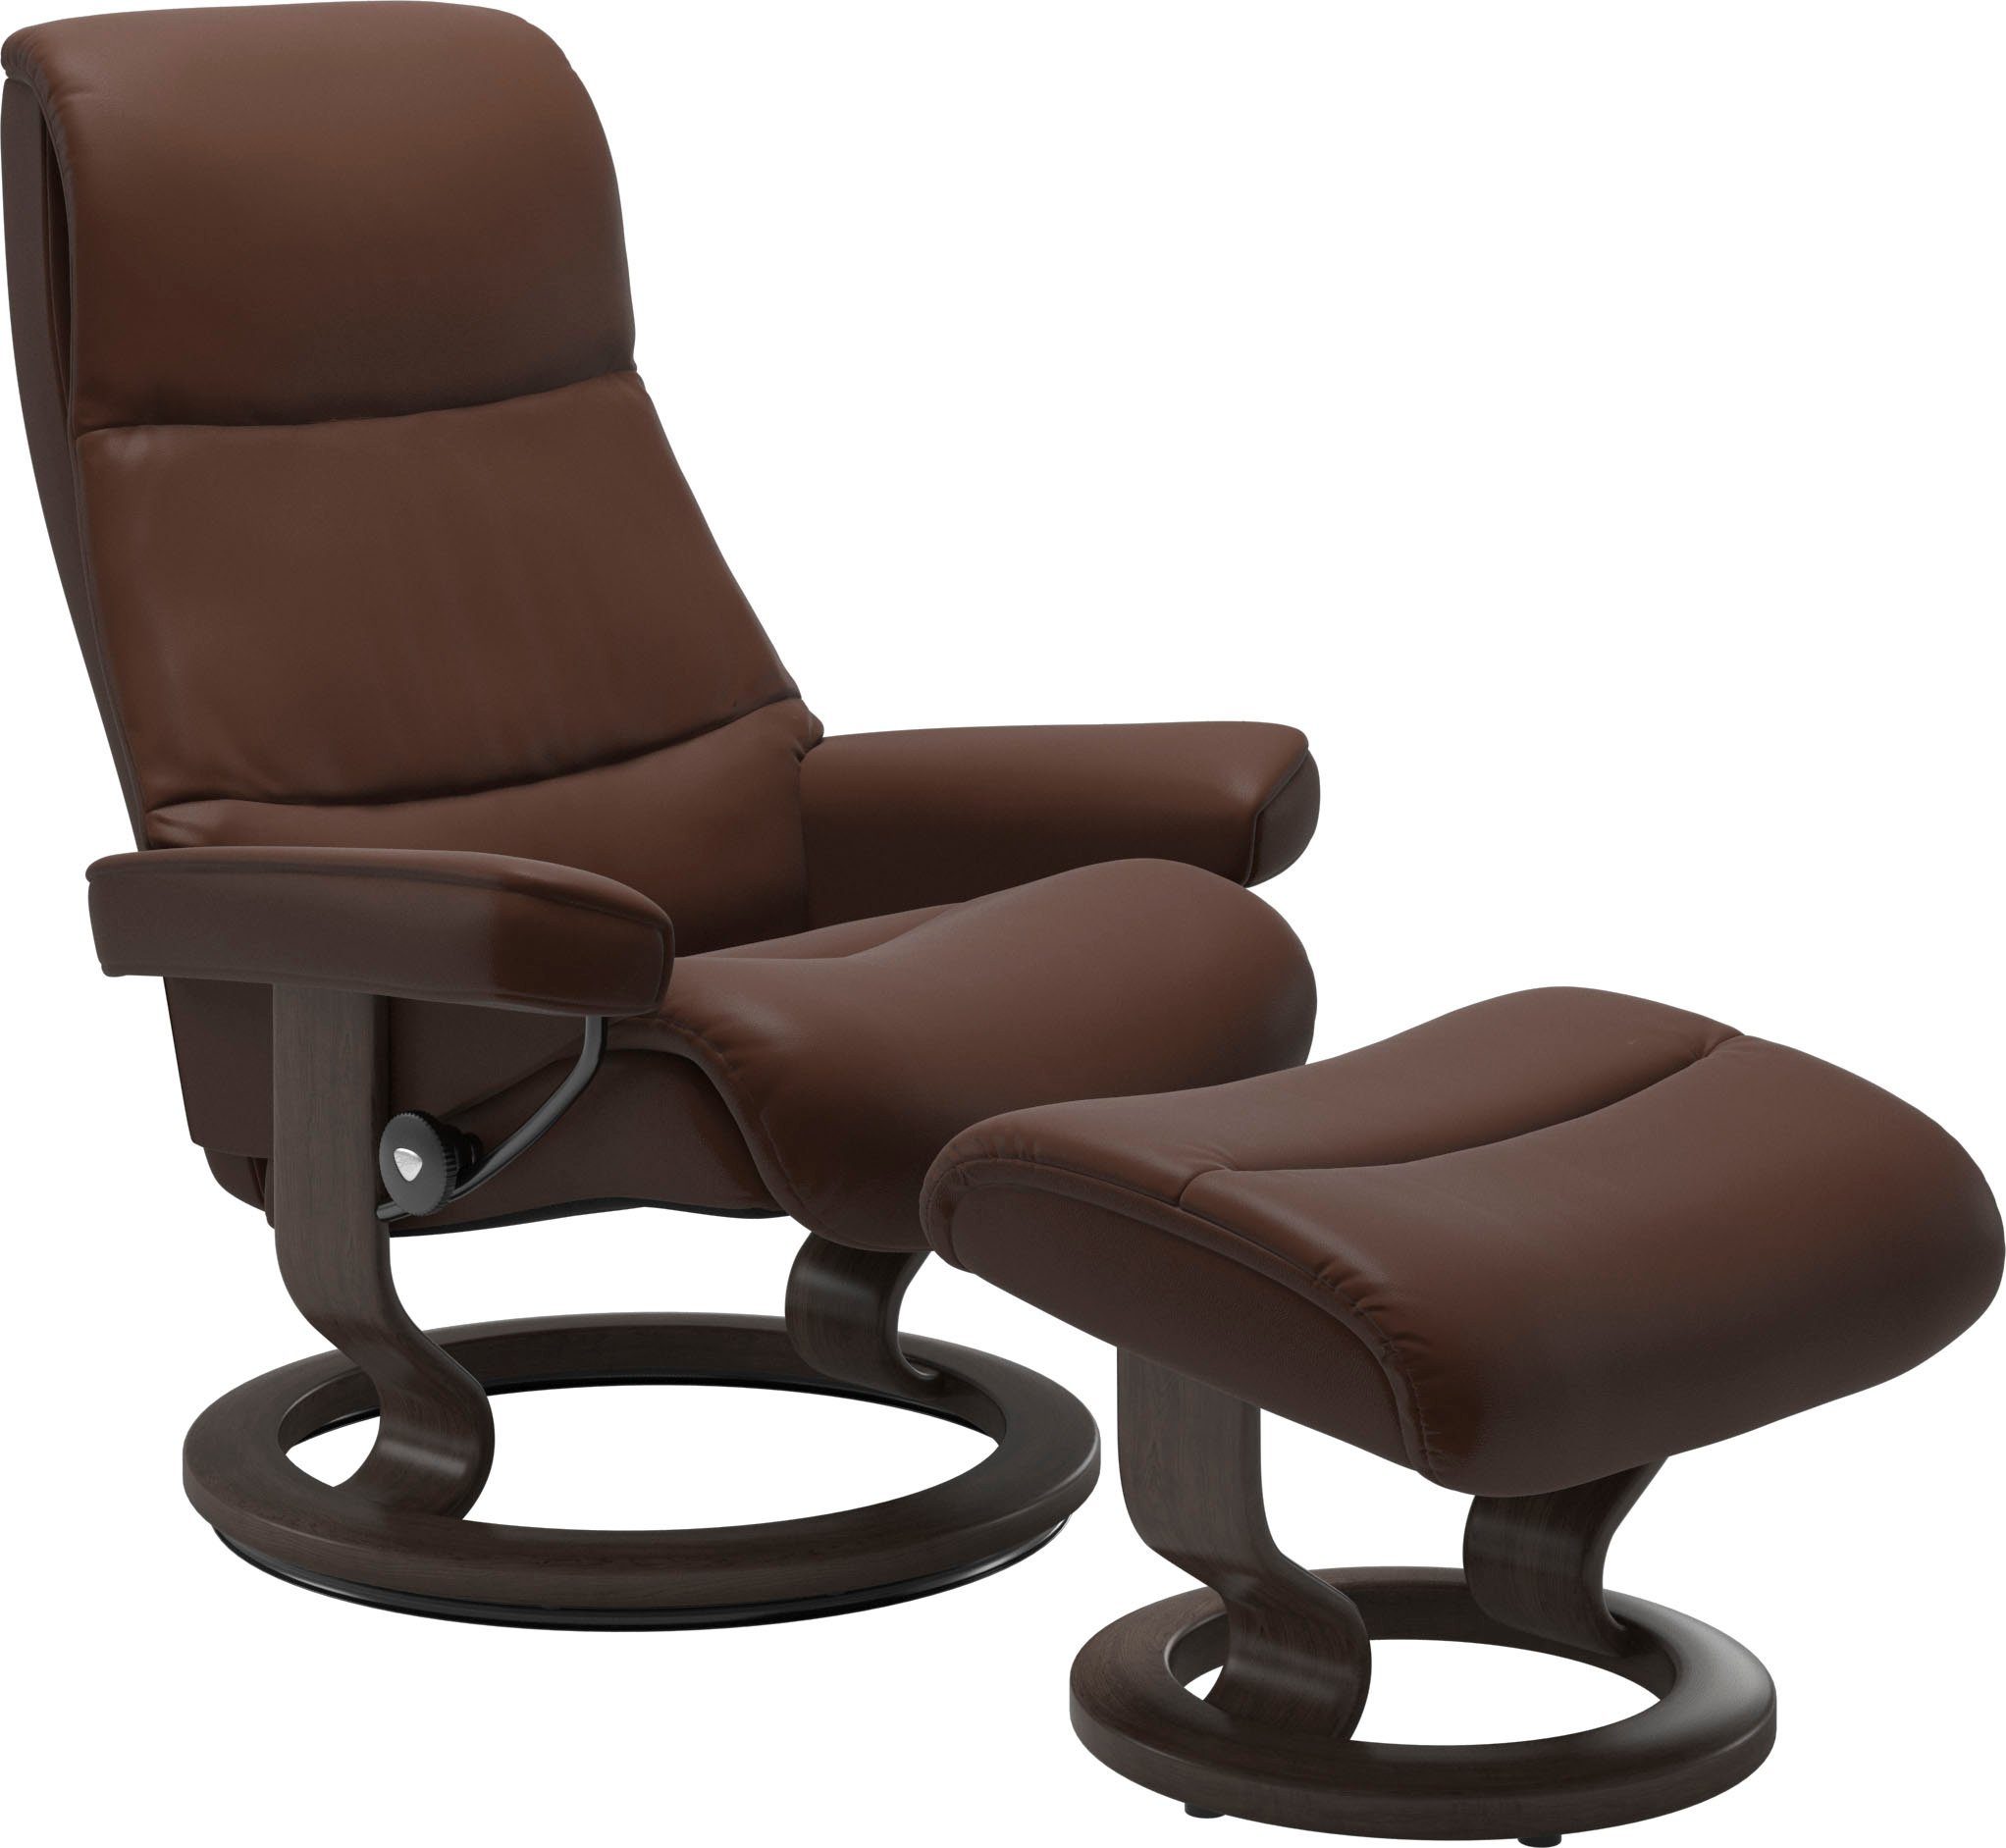 Stressless® Relaxsessel View, Base, Wenge L,Gestell Größe Classic mit